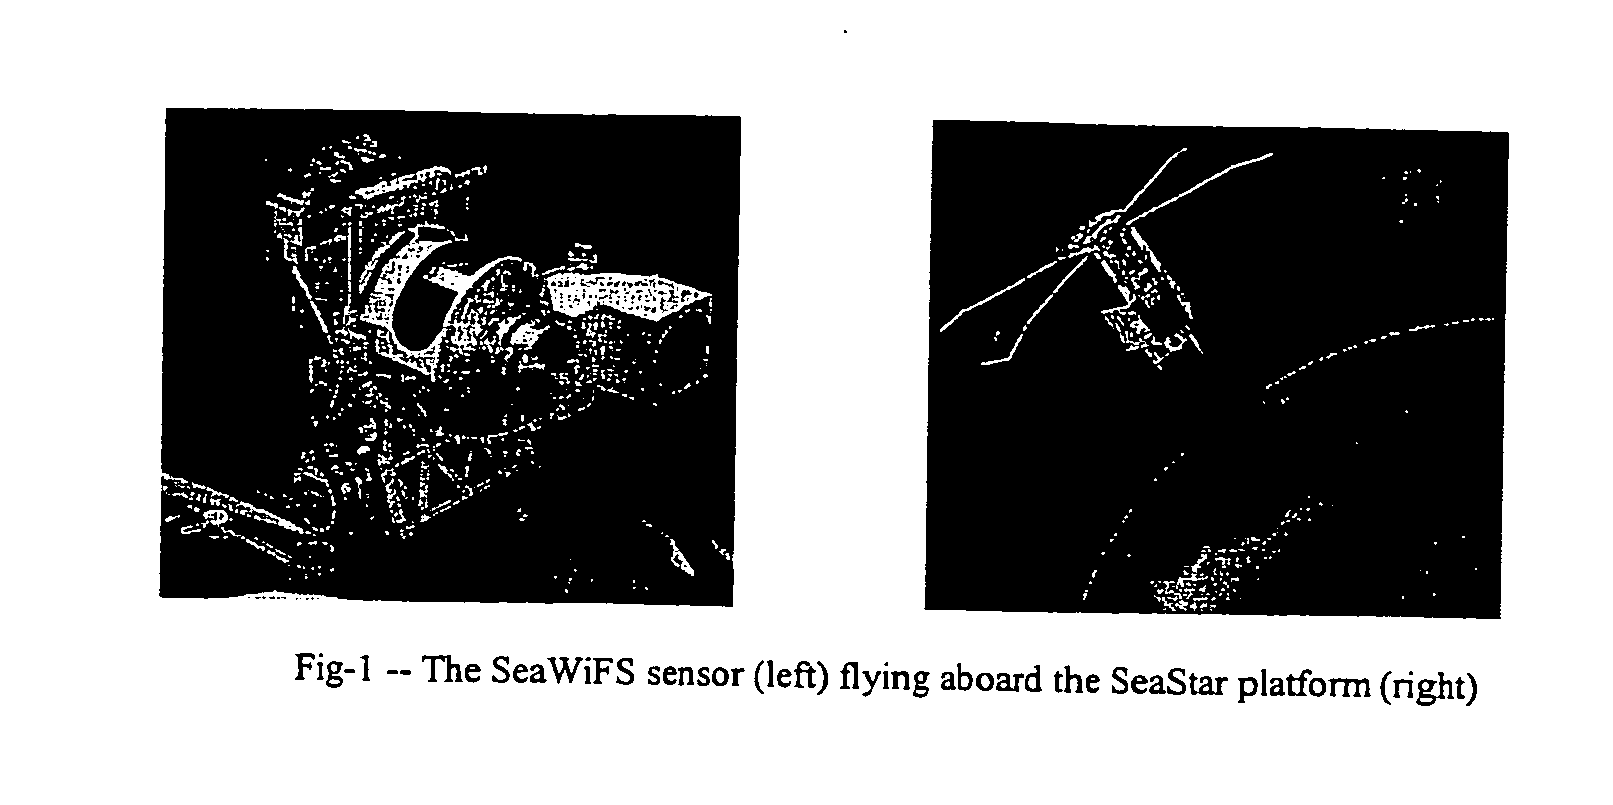 System and method for significant dust detection and enhancement of dust images over land and ocean